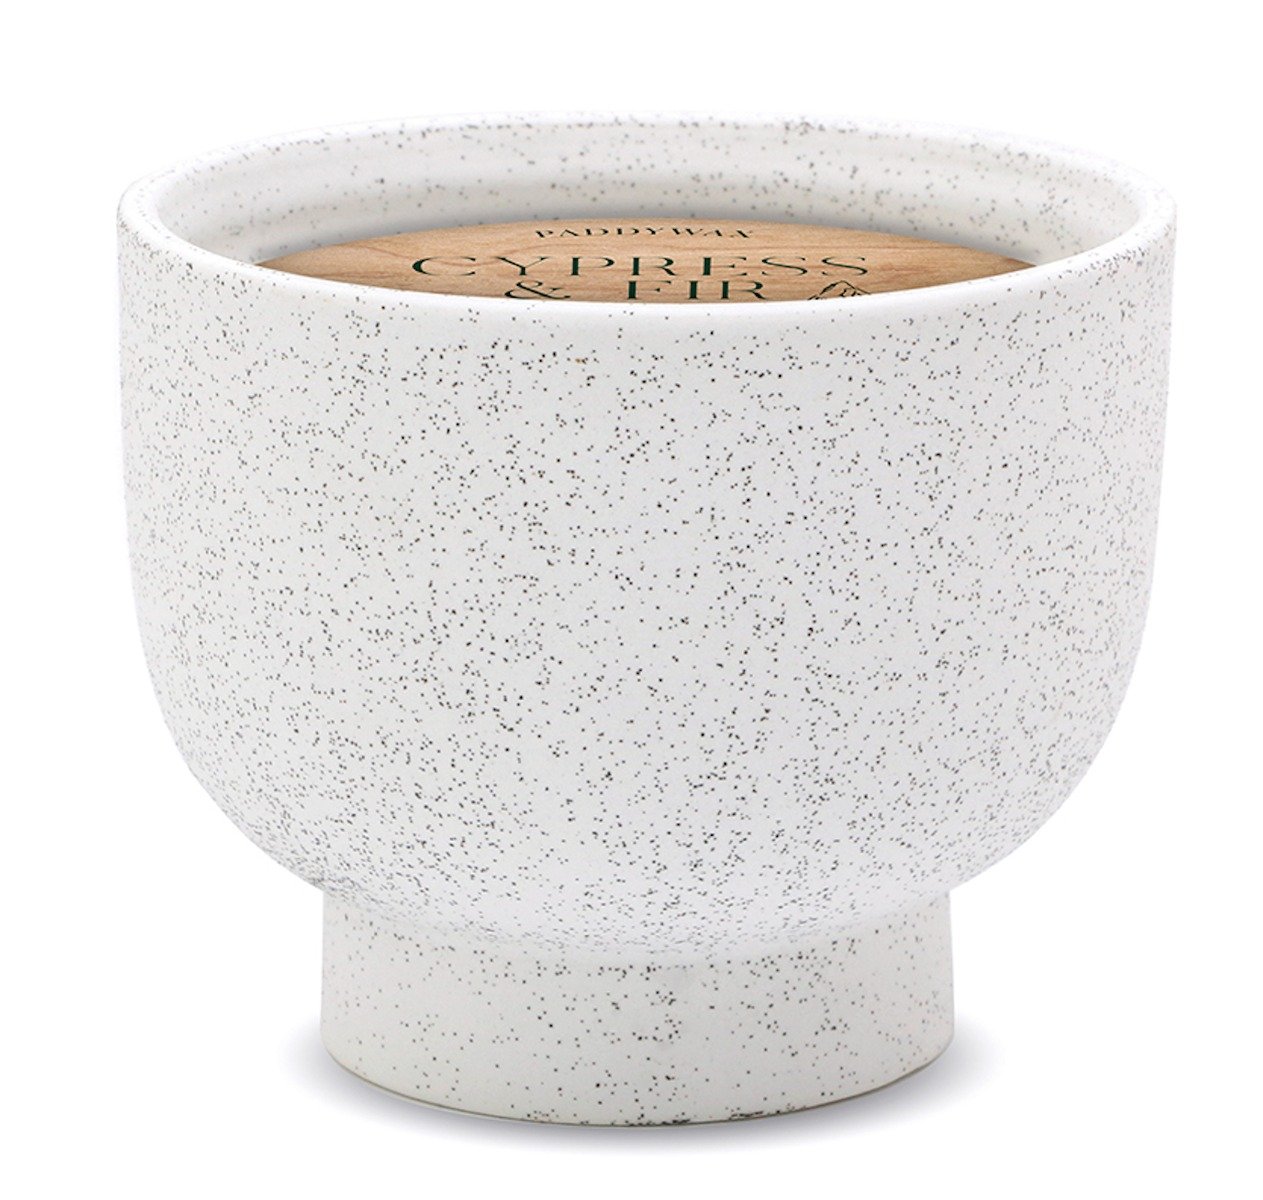 Cypress & Fir Ivory Speckled Ceramic Candle